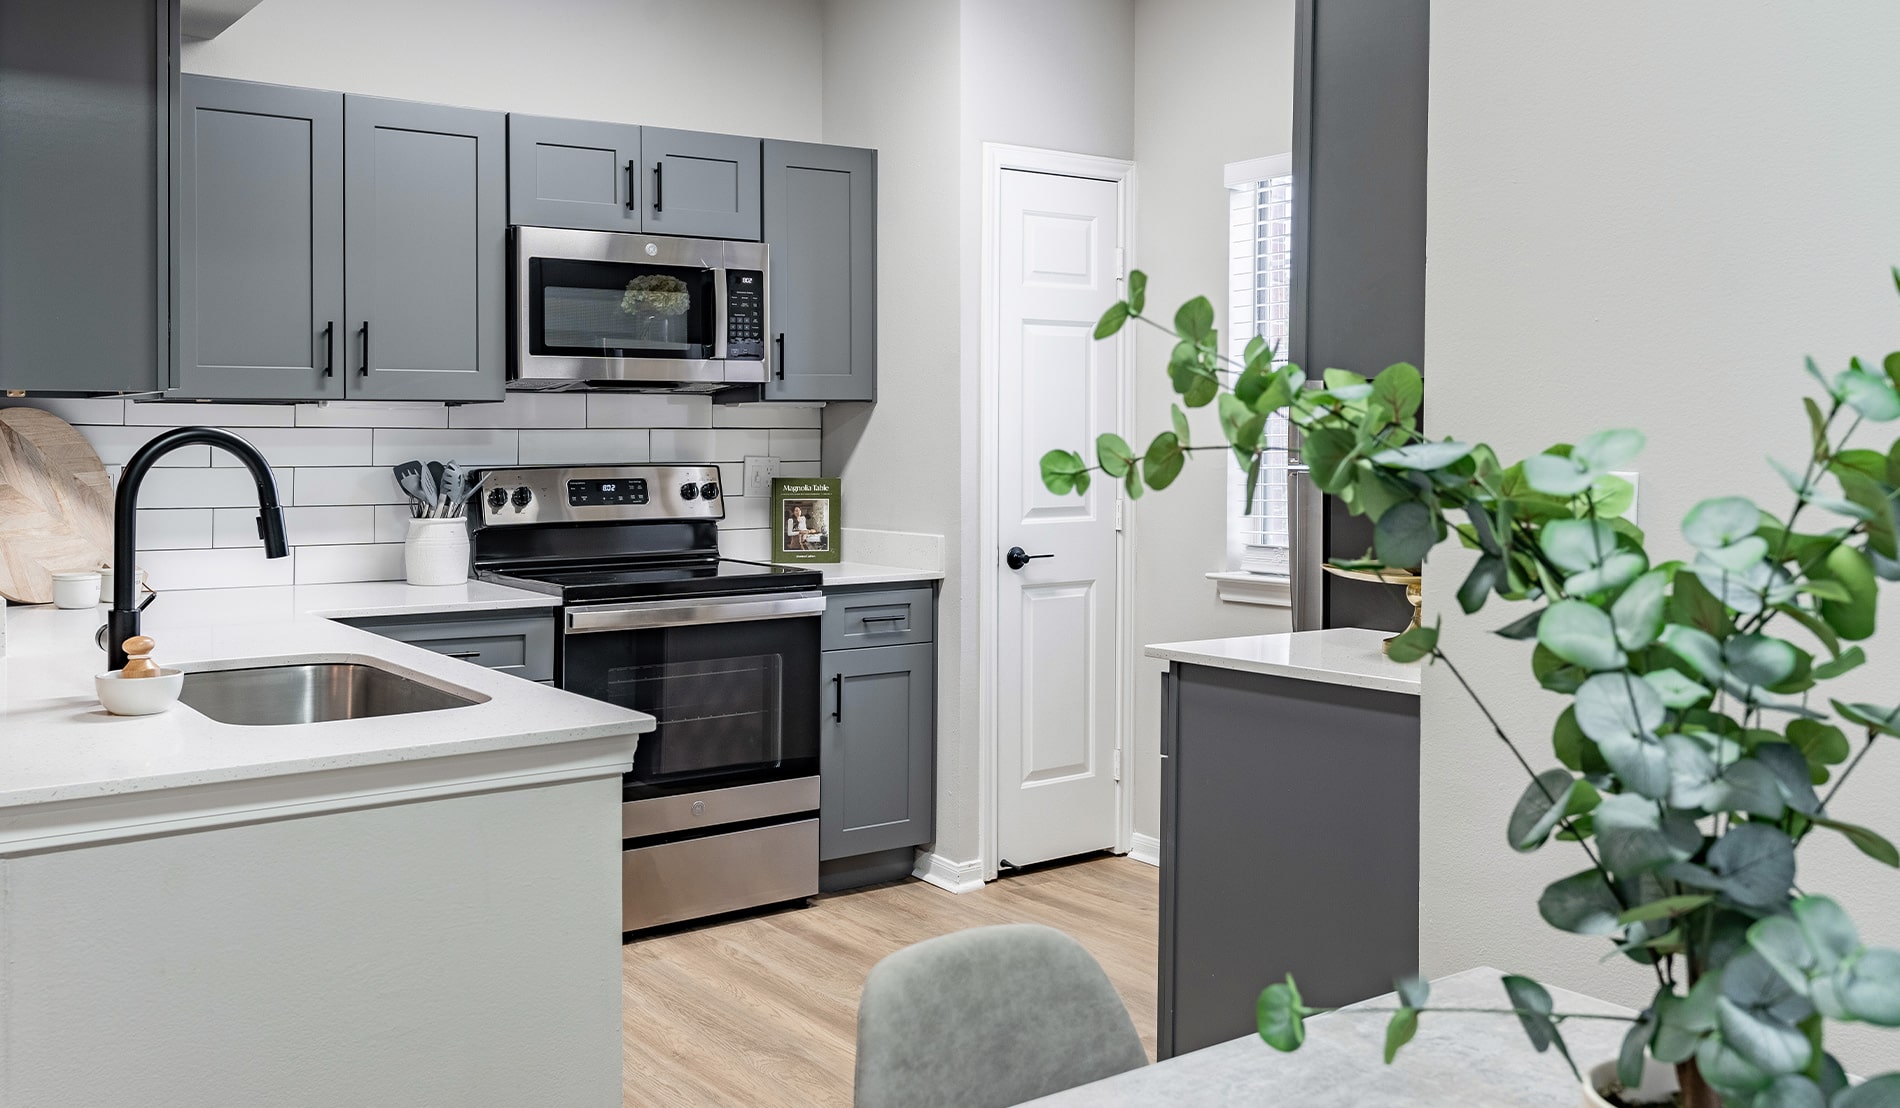 The Preserve at Brentwood Apartments Kitchen with Gray Cabinets and White Countertops with a Plant in the Foreground